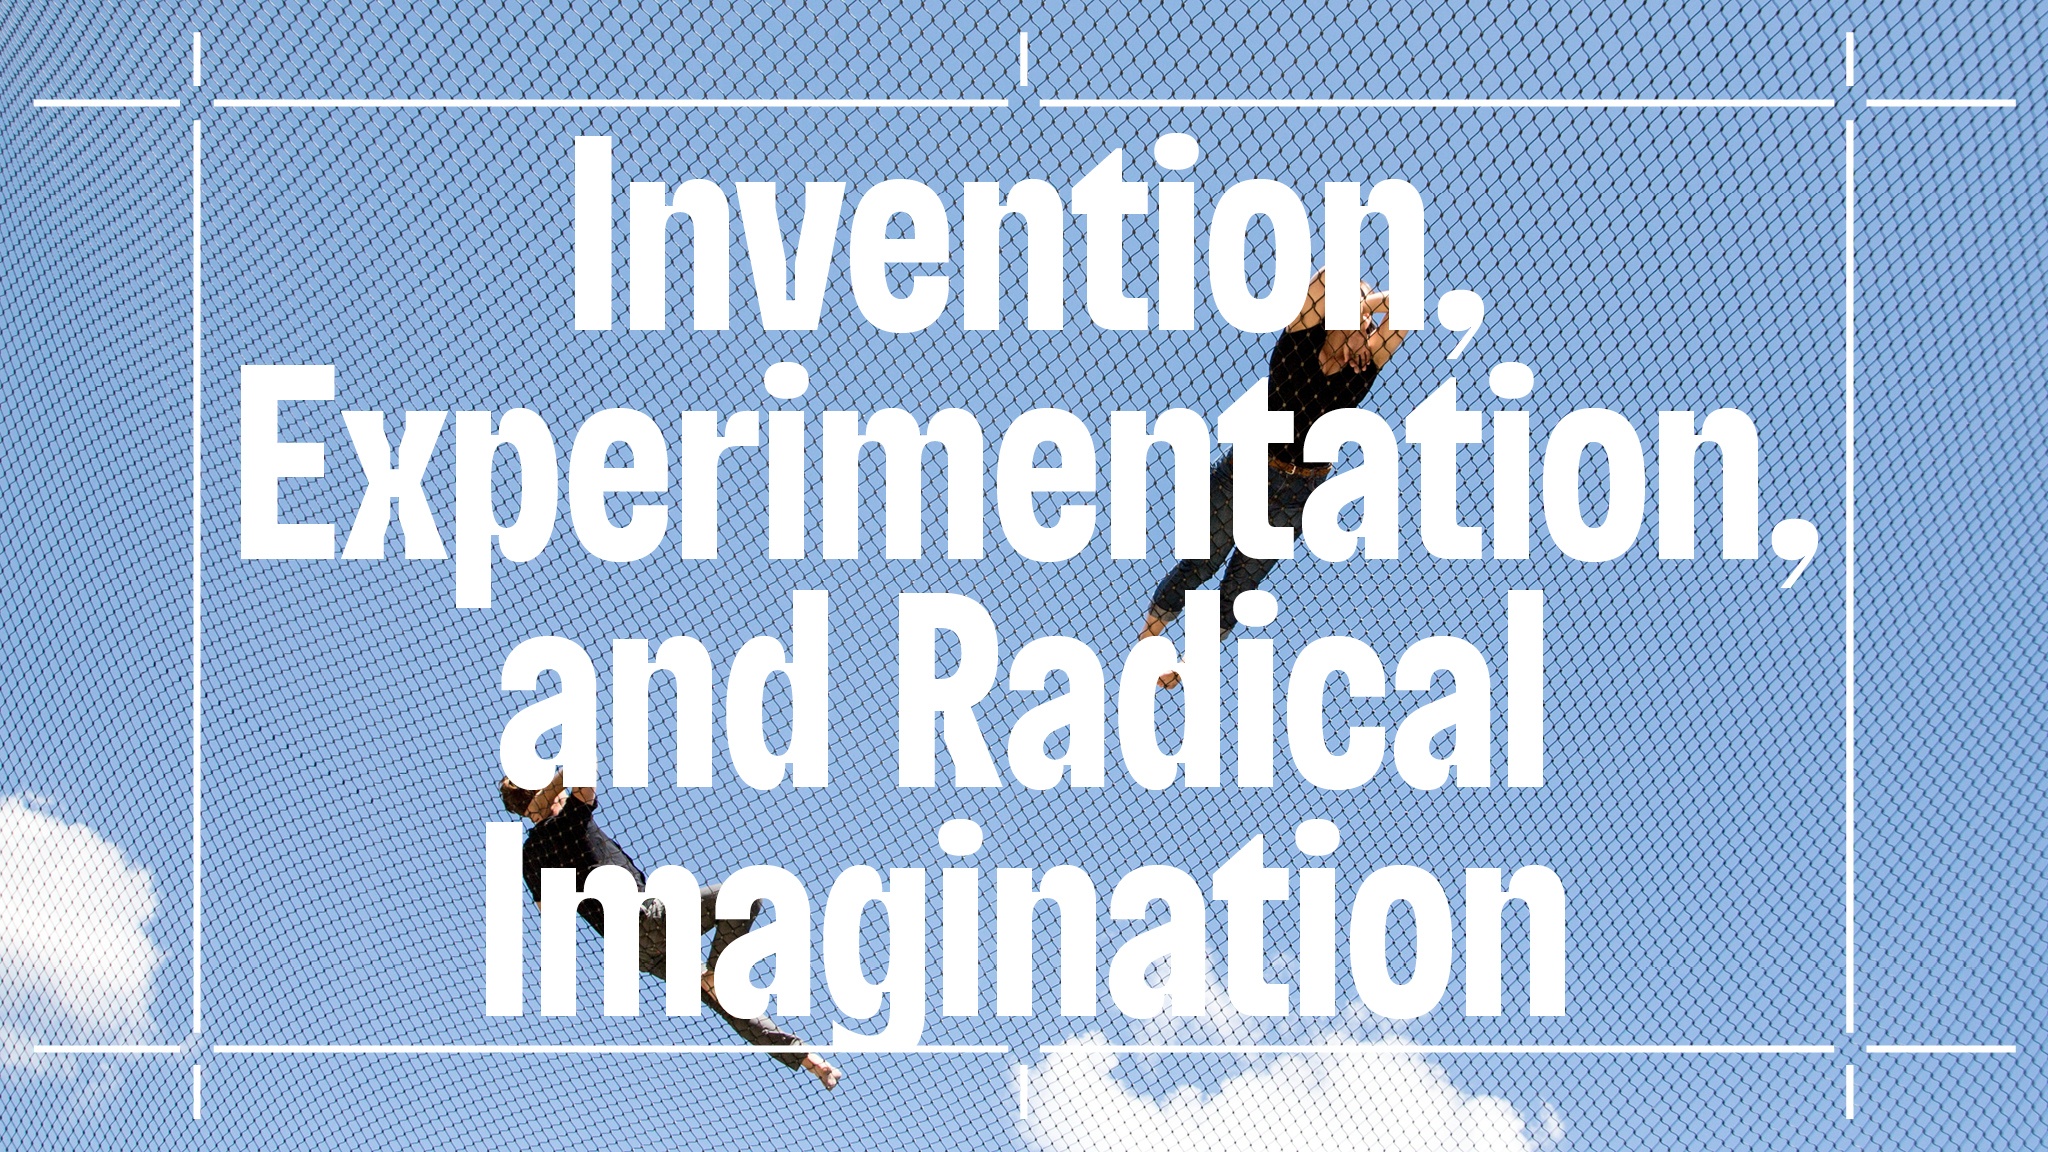 The event title "Invention, Experimentation, and Radical Imagination" overlaid on a photo of two people suspended on wire nets, seen from below against a blue sky.